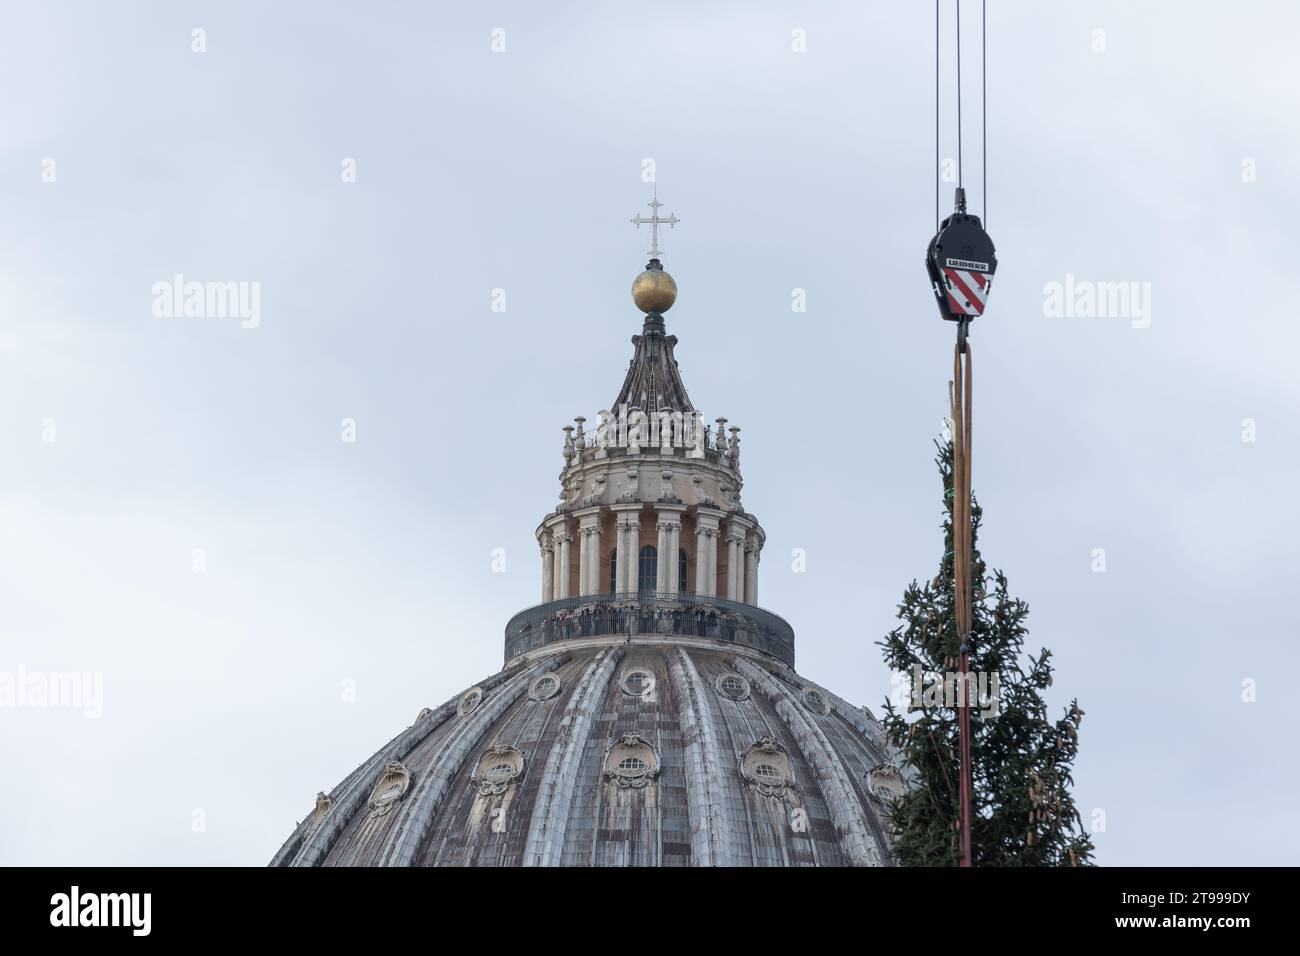 Rome, Italy. 23rd Nov, 2023. Detail of the installation of the Christmas tree in St. Peter's Square. The Christmas tree arrived in St. Peter's Square with 27 meters high, it weighs 6.5 tons and was donated by the municipality of Macra, in the woods of Cuneo. It will be decorated with lights and over 7,000 dried edelweiss which will give the effect of a snowfall. The lights will be turned on next December 9. (Photo by Matteo Nardone/Pacific Press) Credit: Pacific Press Media Production Corp./Alamy Live News Stock Photo